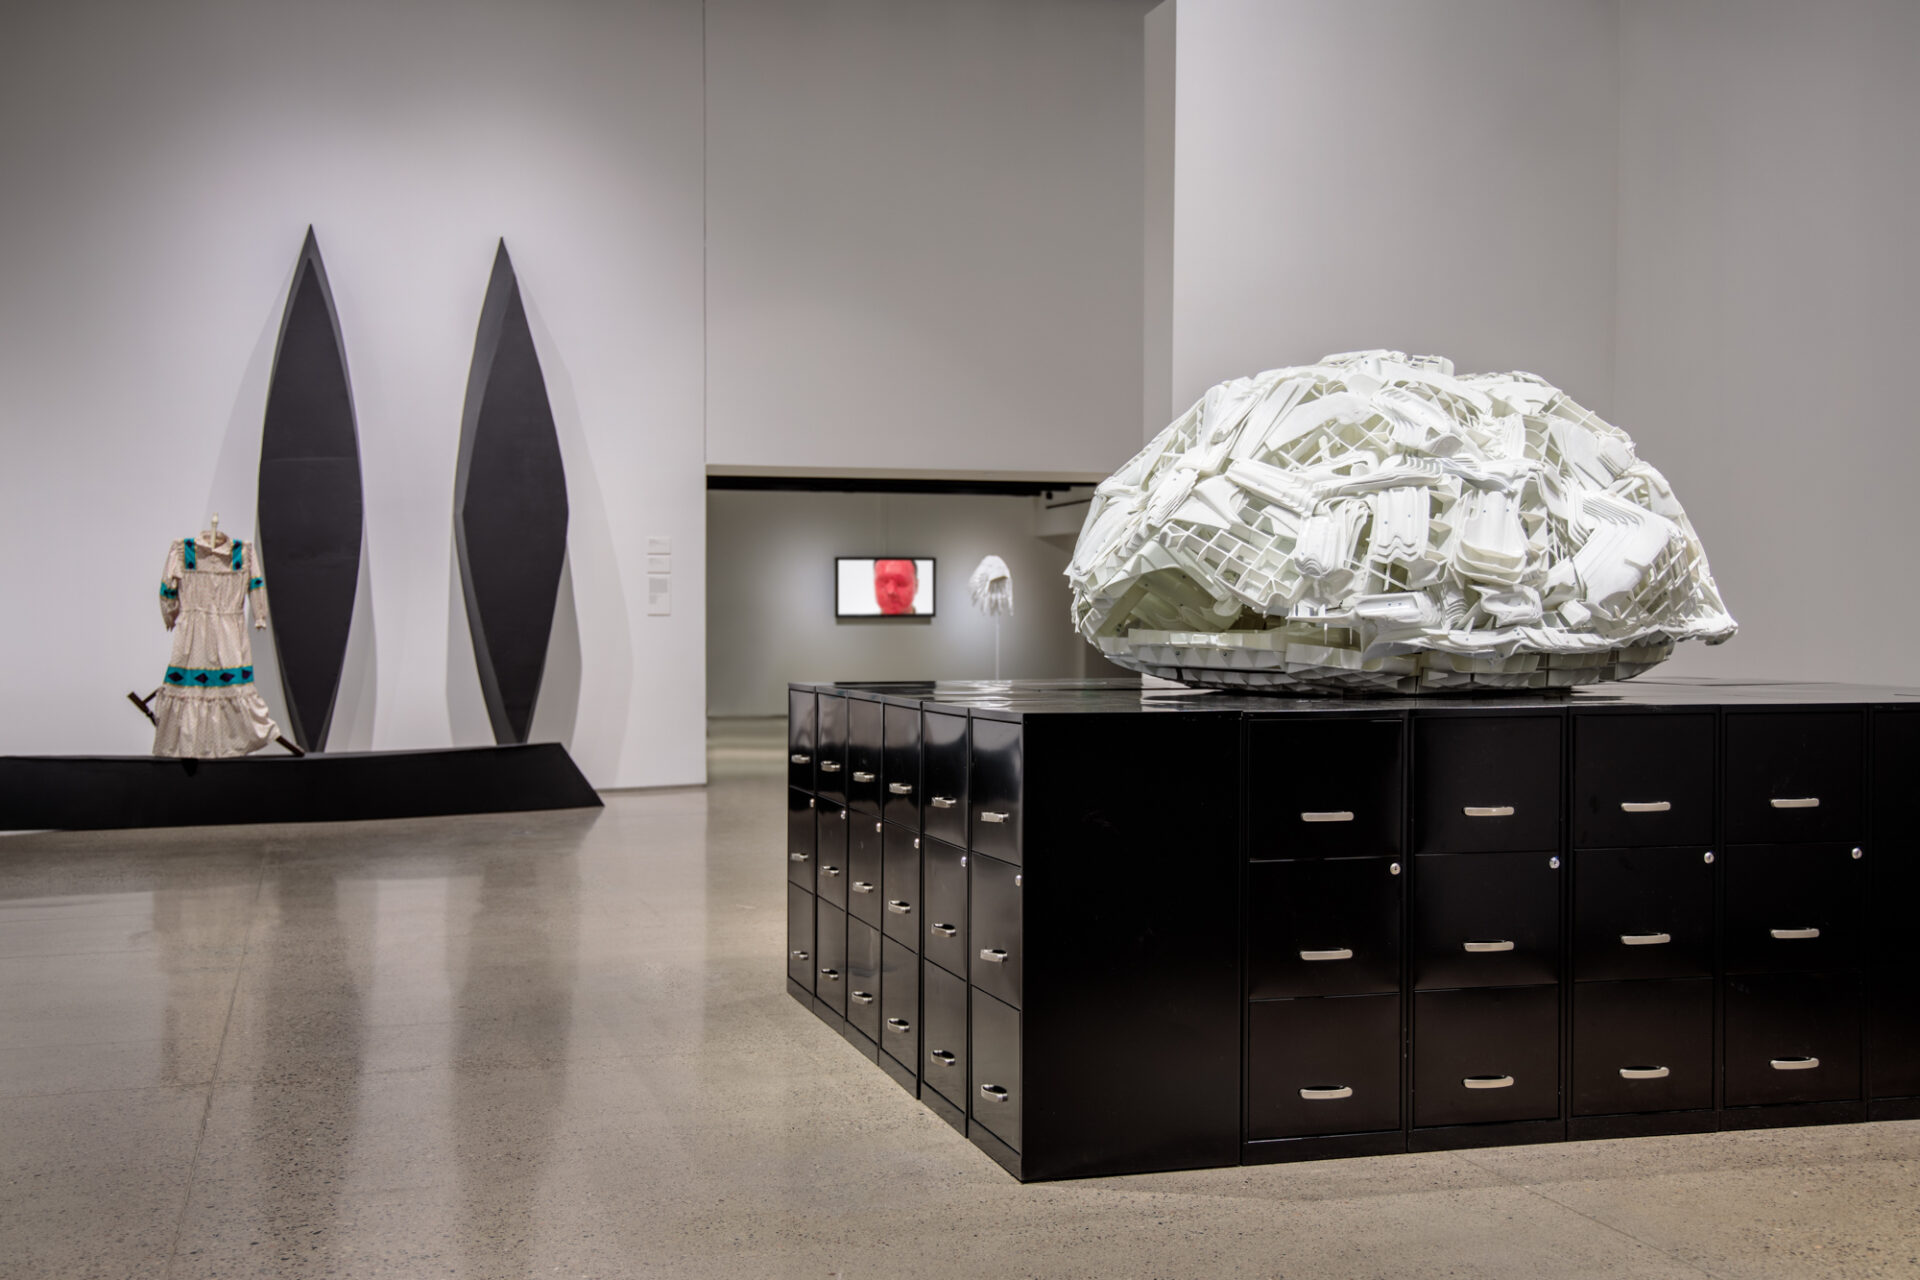 A gallery with a large white sculpture on top of a black table.